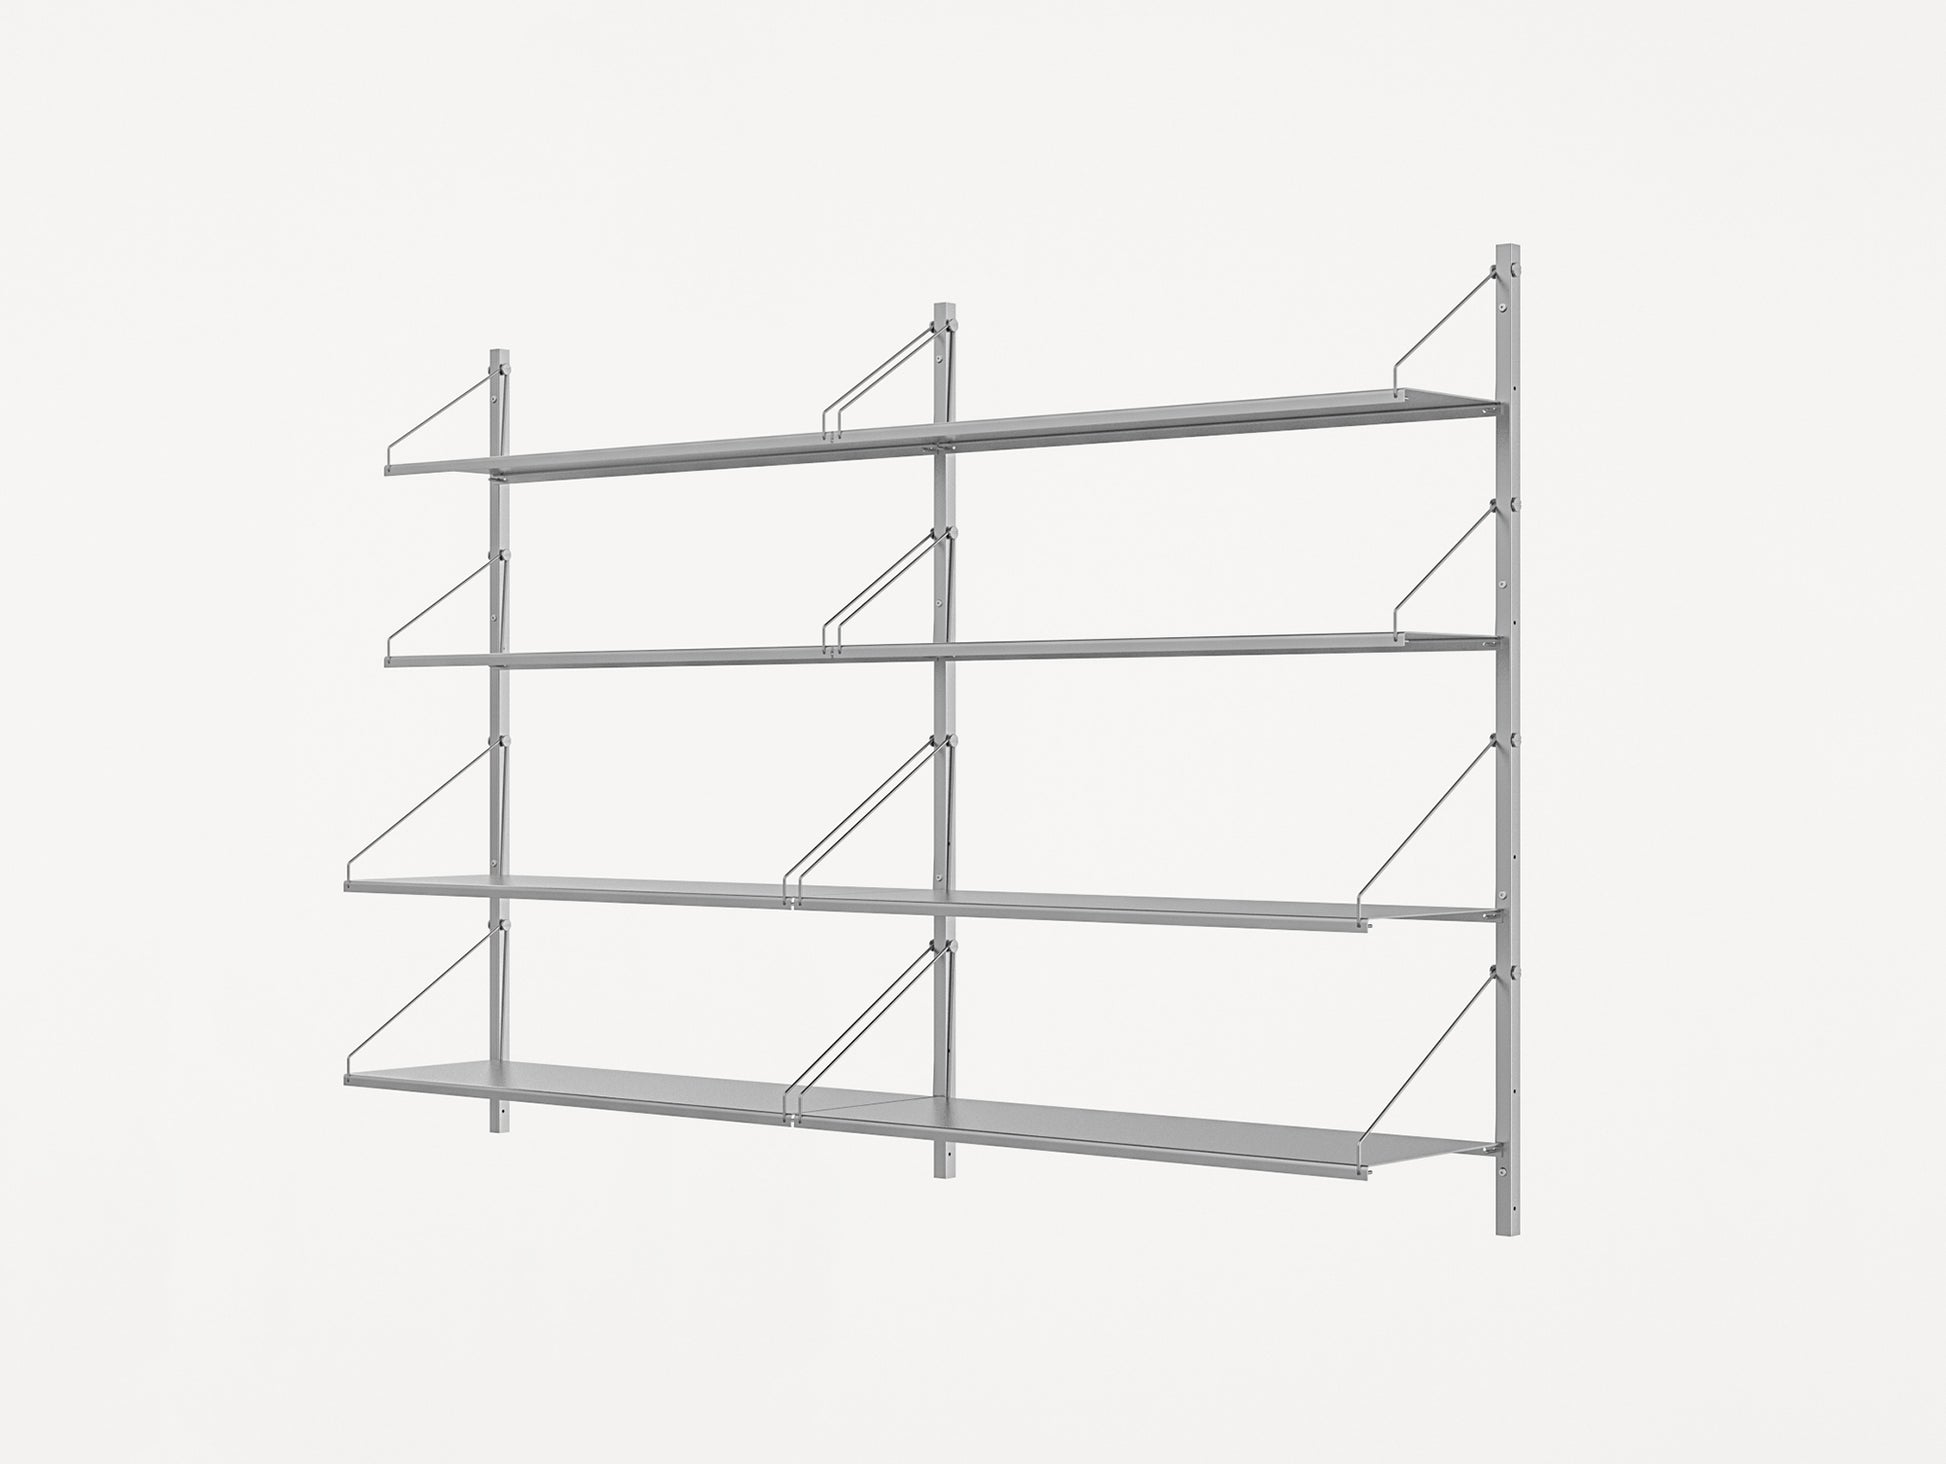 Shelf Library Stainless Steel by Frama - H1084 cm /  Double Section (w80 shelves)